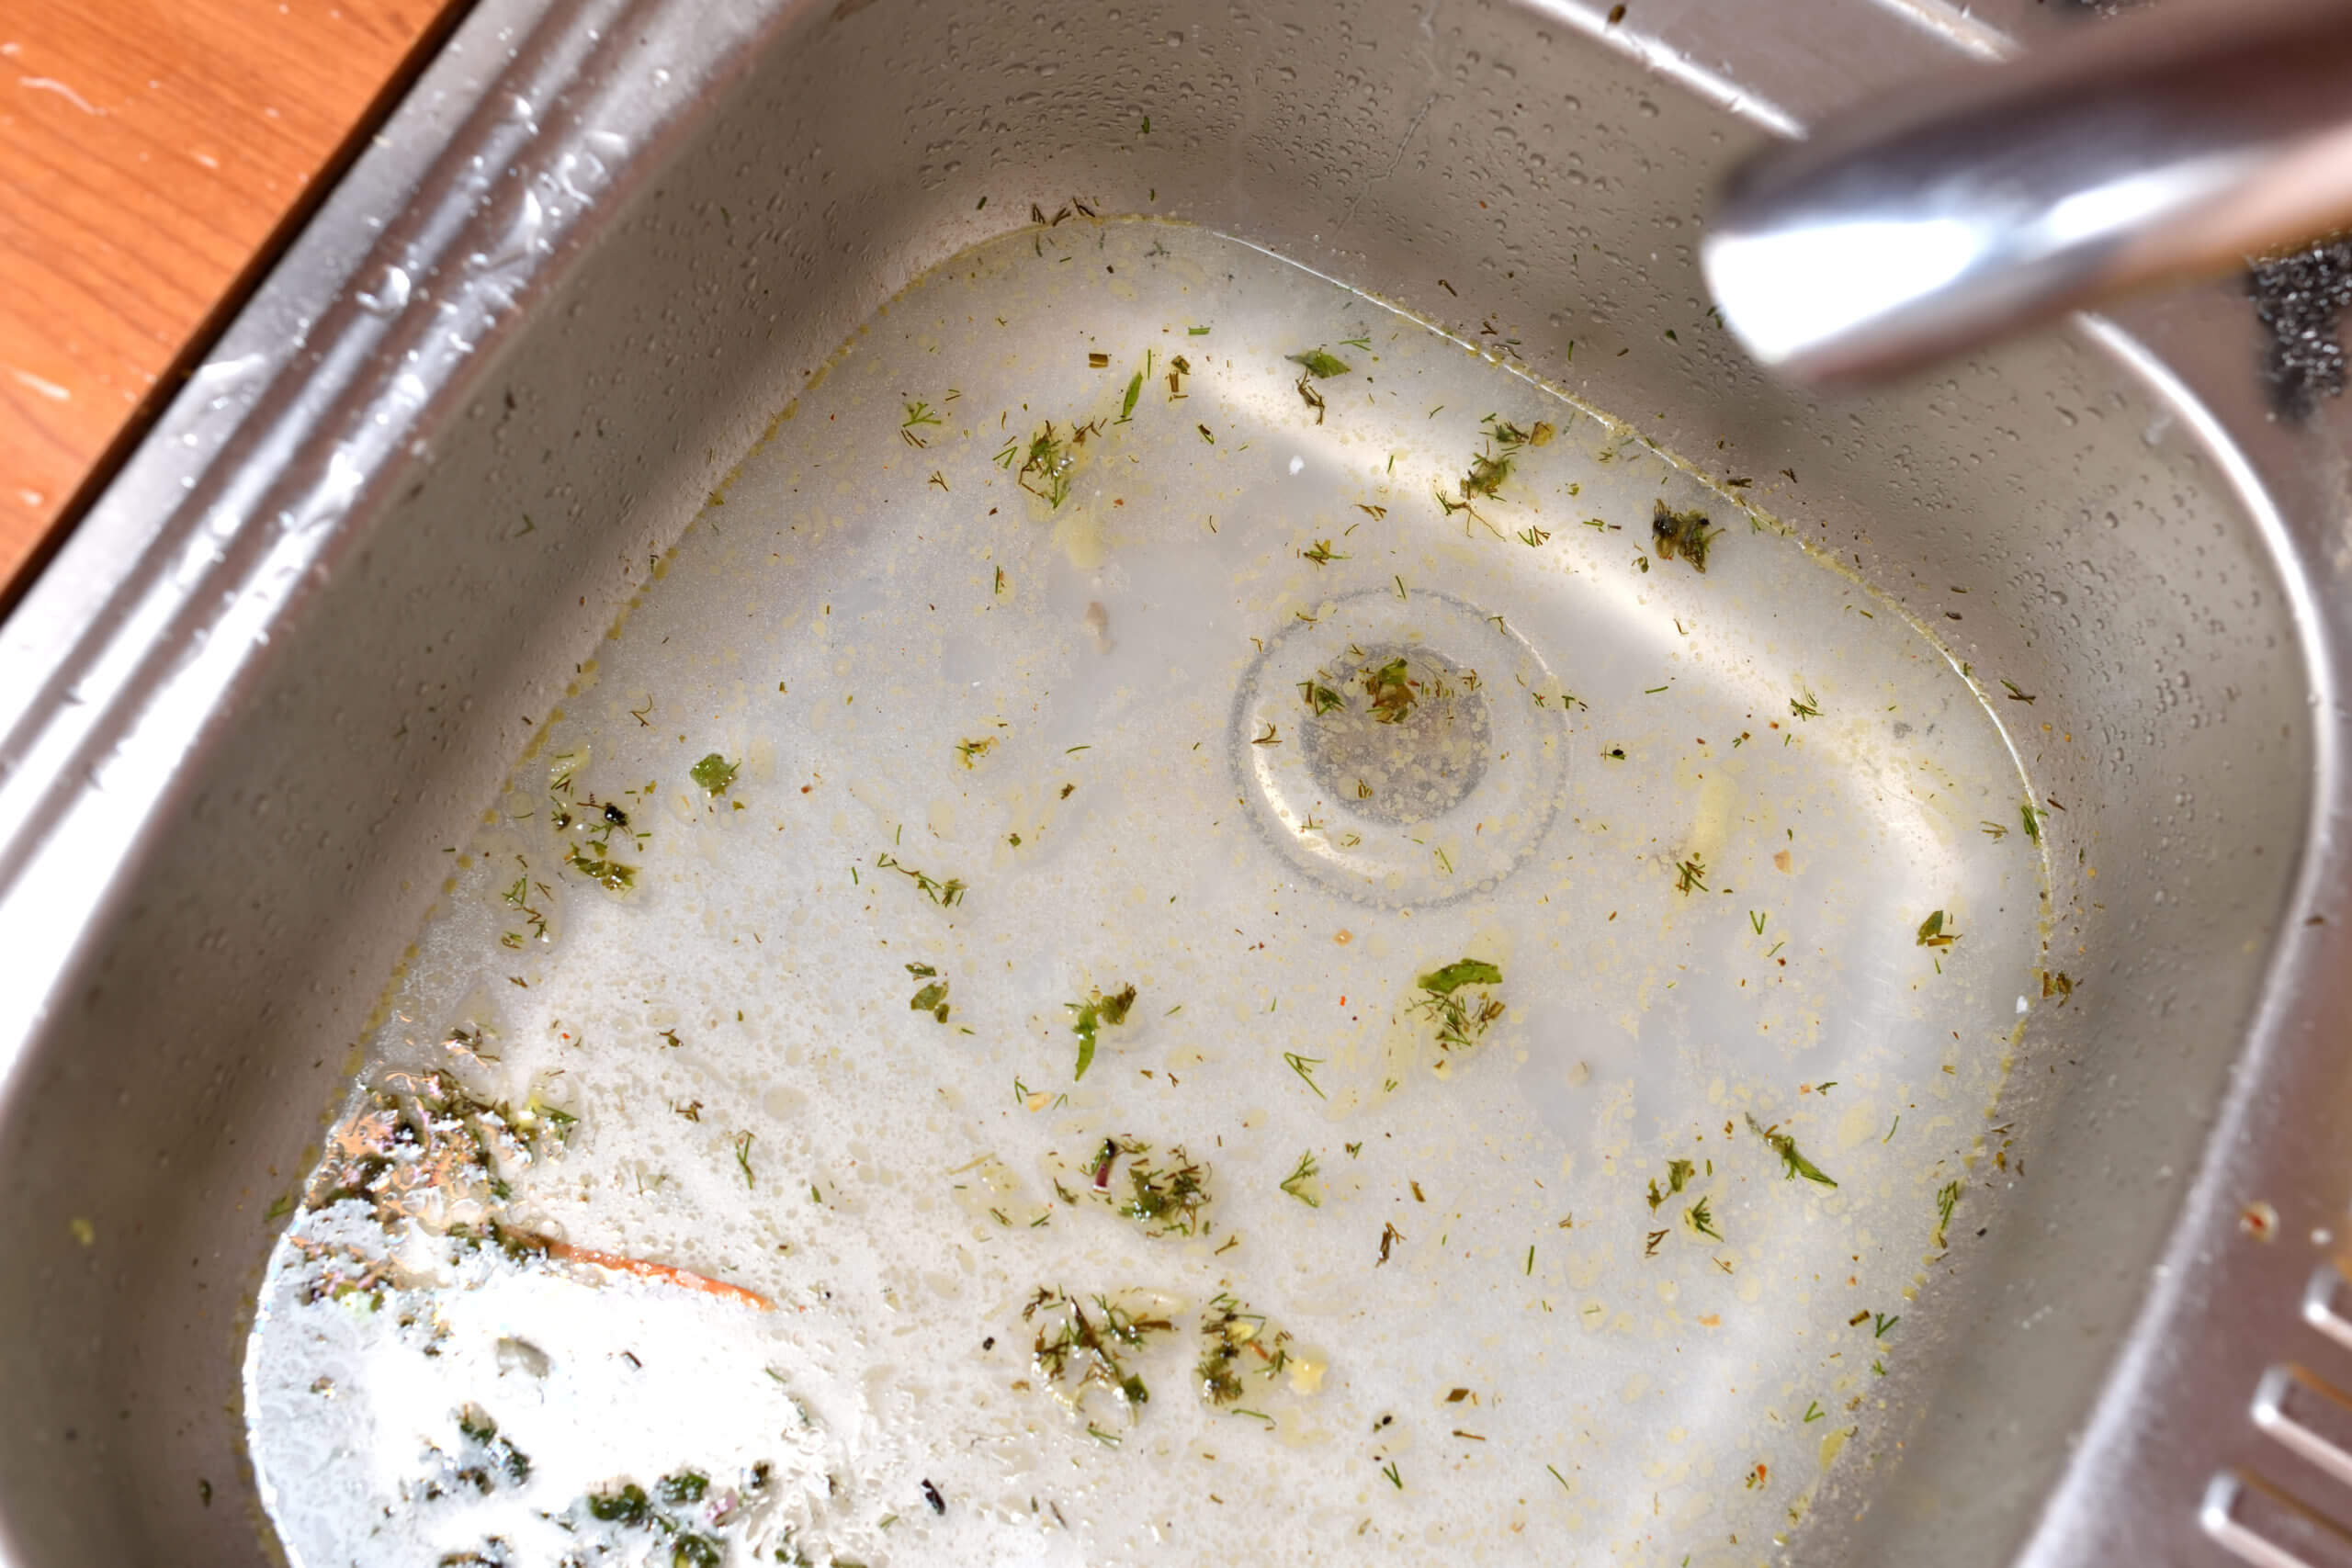 Kitchen Sink Clogged? How To Release The Grease!